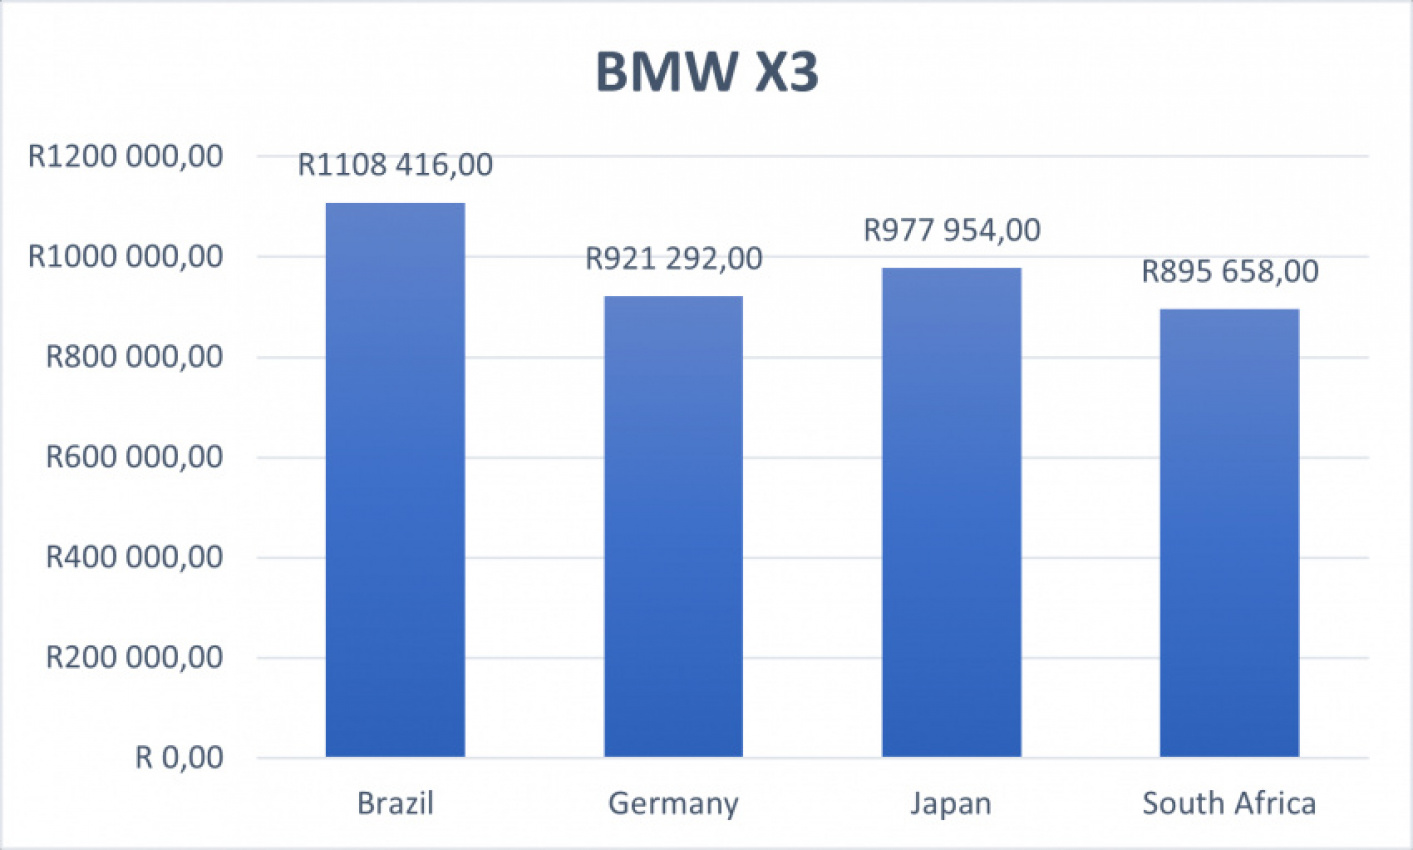 autos, cars, features, bmw, bmw x3, mercedes-benz, mercedes-benz c-class, porsche, porsche 911 carrera, toyota, toyota hilux, volkswagen, vw polo, how south africa’s car prices compare to brazil, germany, and japan